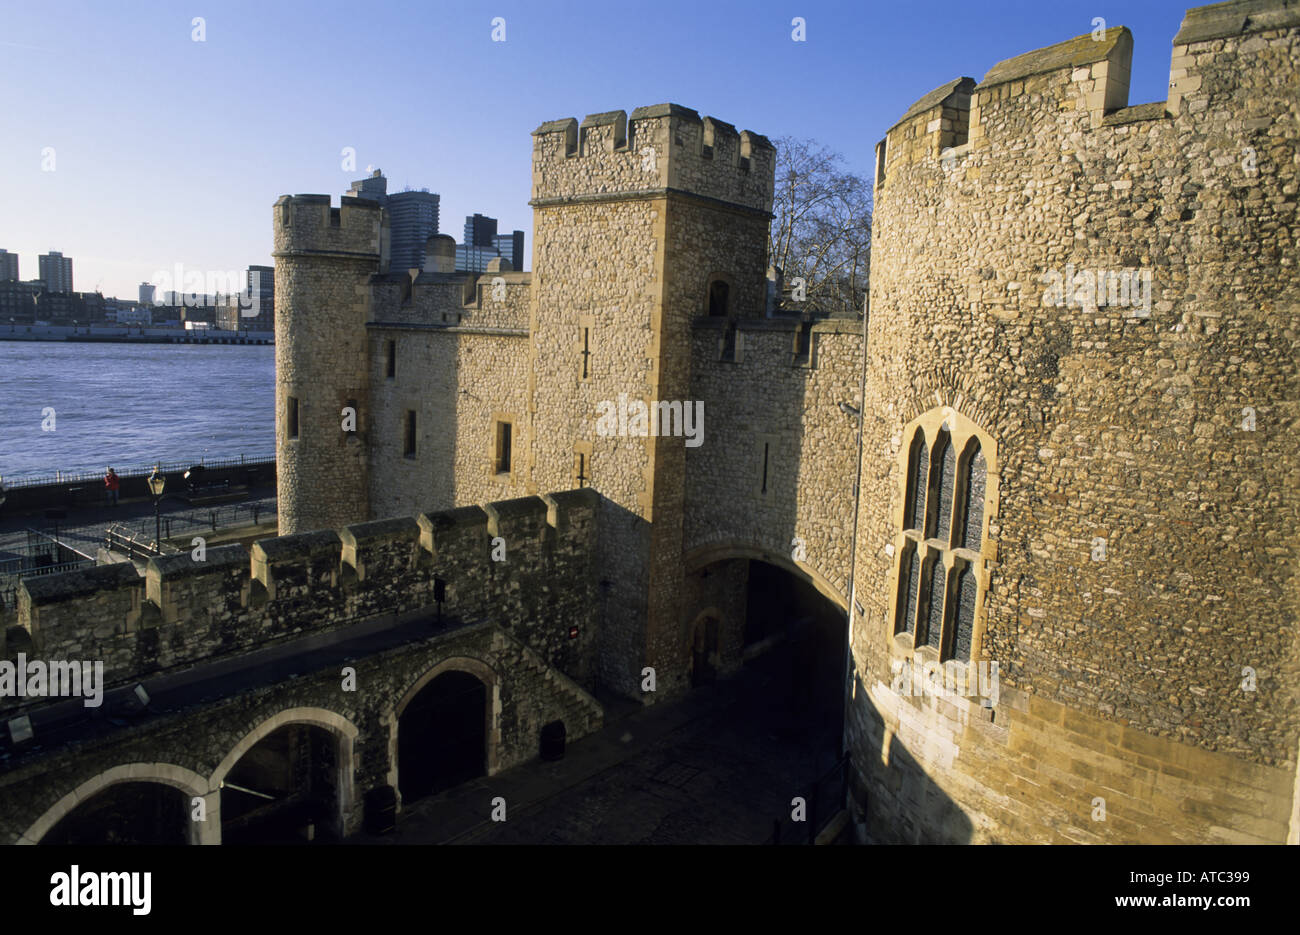 River Thames outside the Tower of London, England, UK. Stock Photo